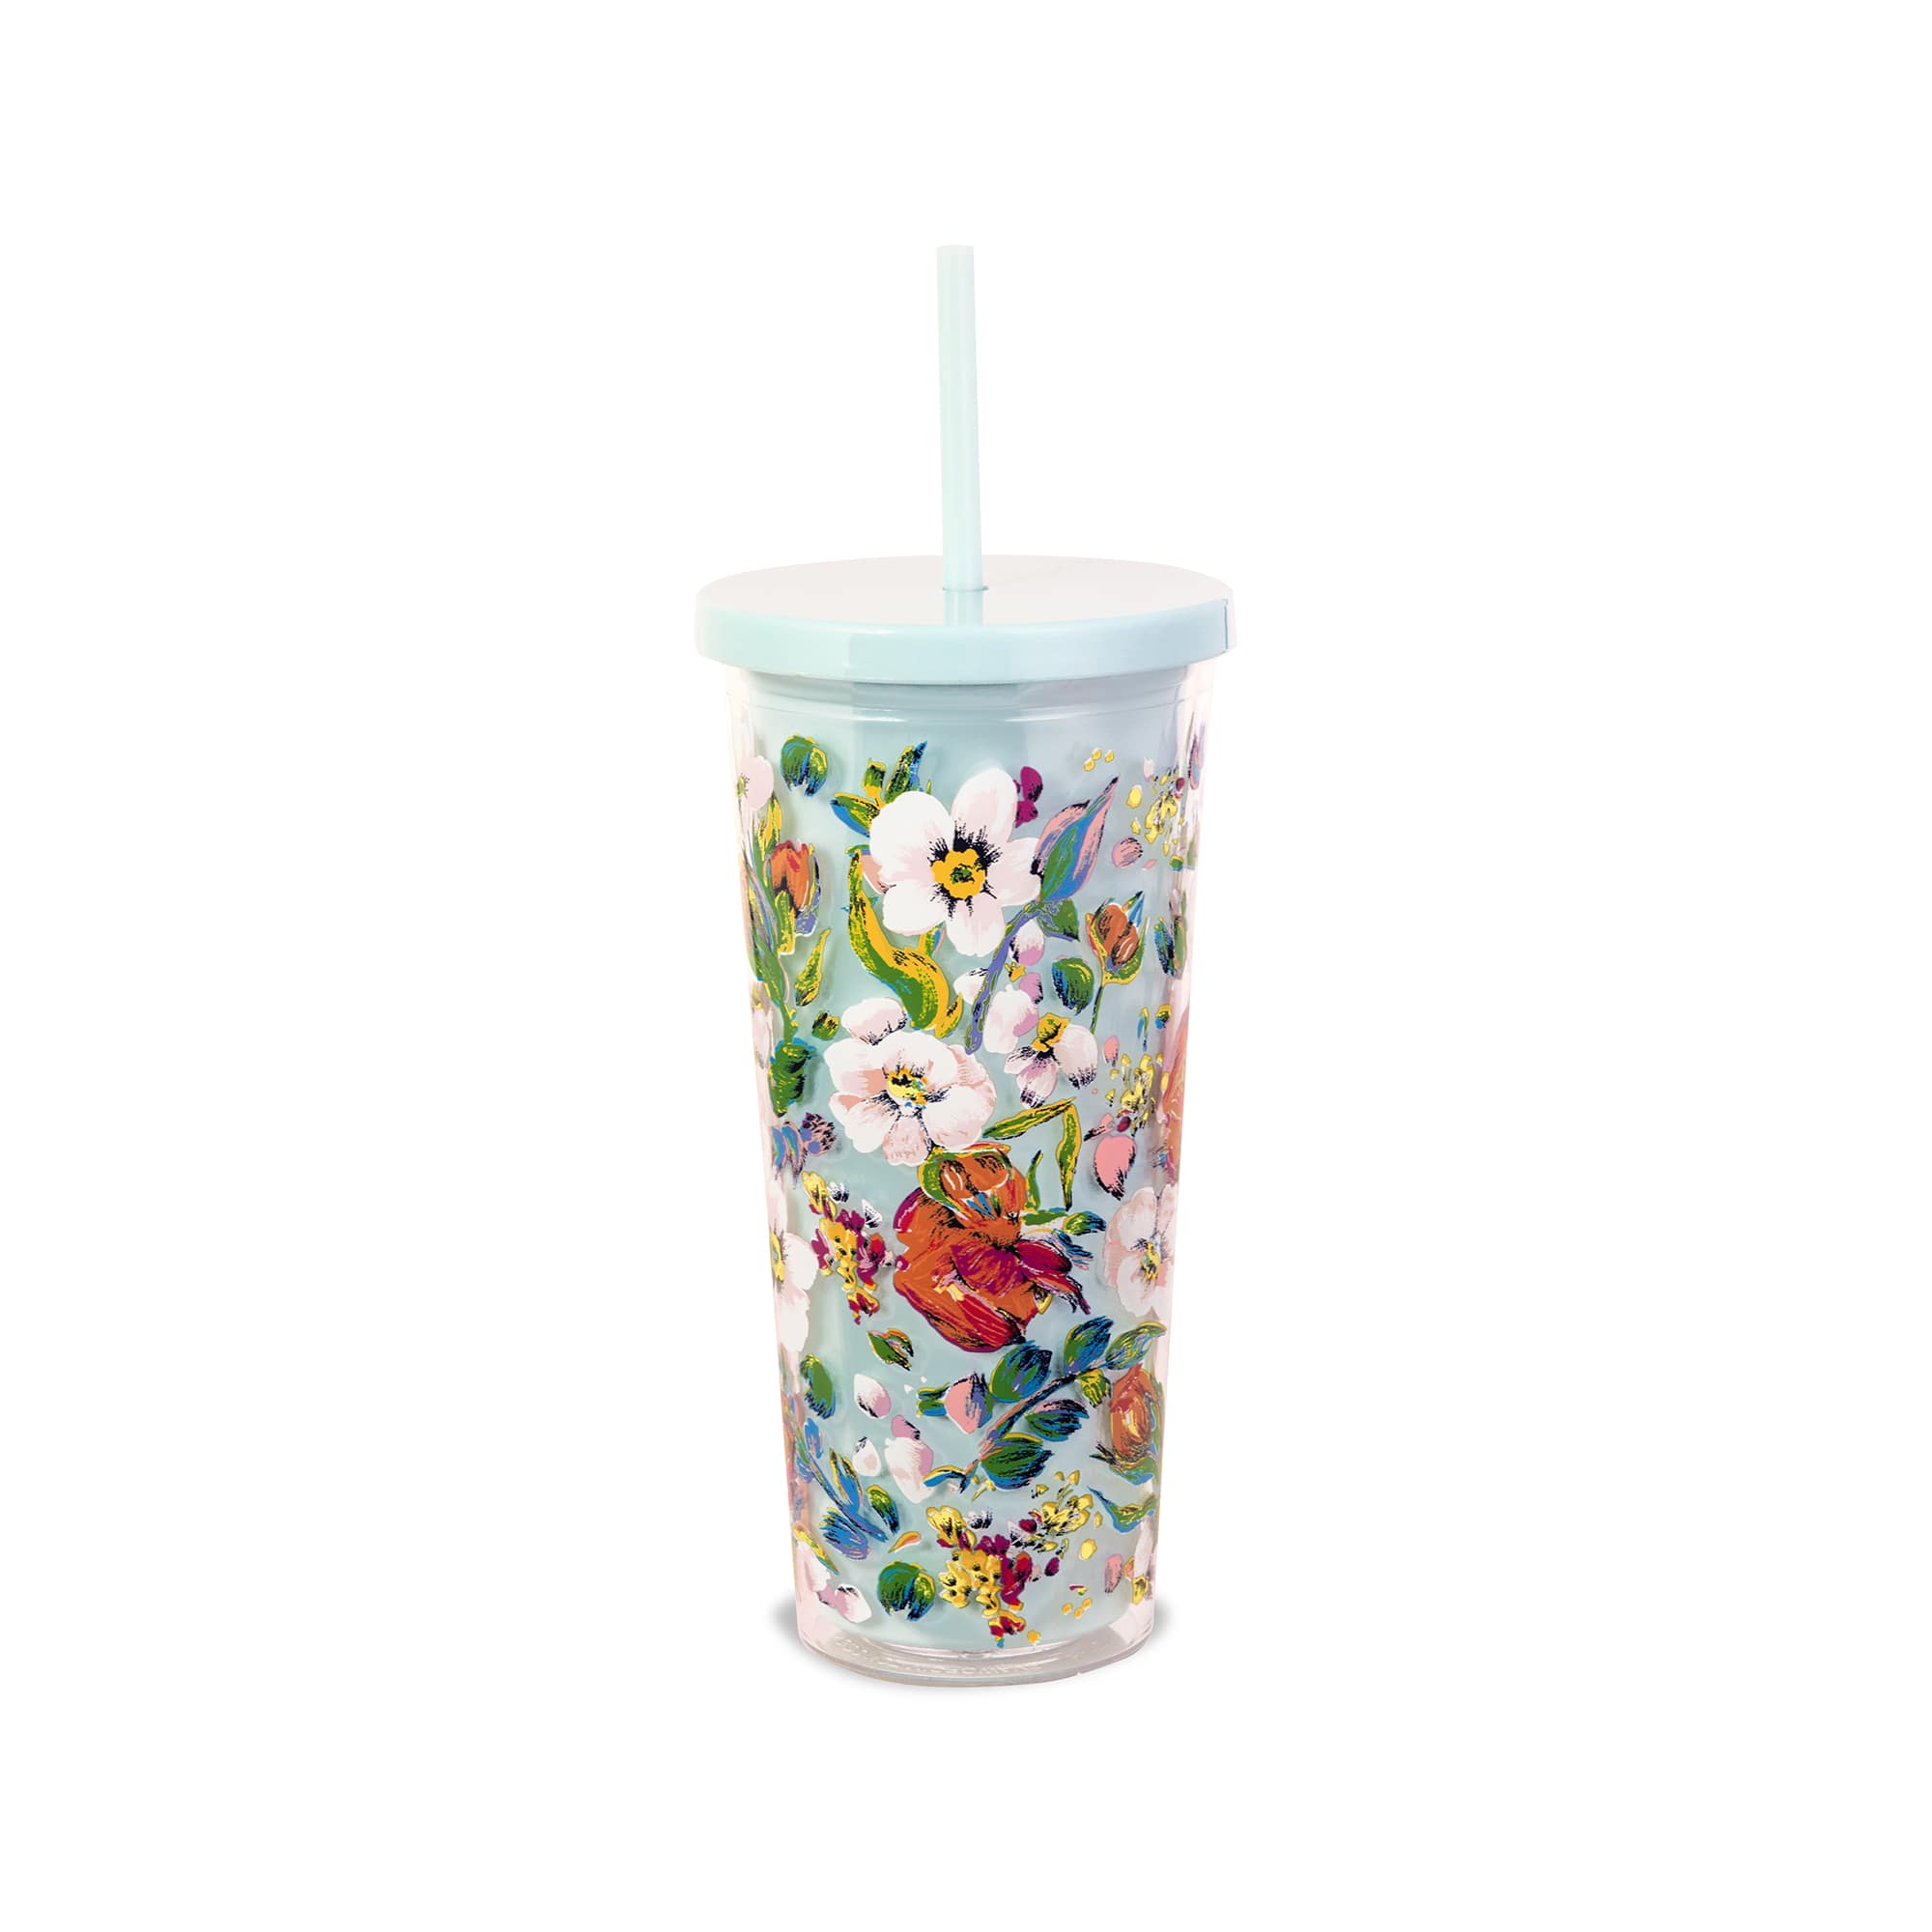  Vera Bradley Travel Tumbler with Lid and Straw, 24